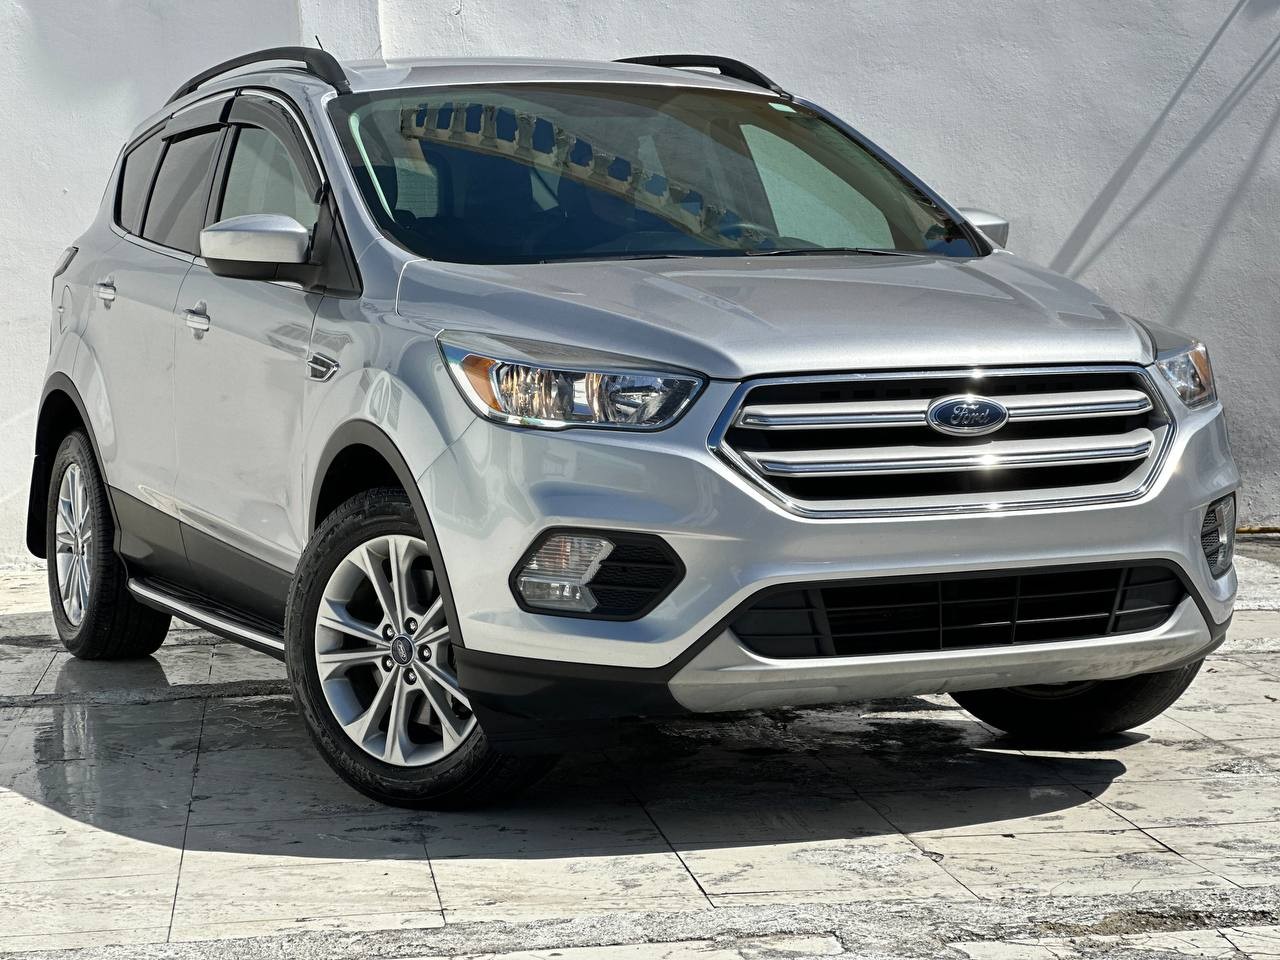 jeepetas y camionetas - FORD ESCAPE Ecoboost turbo 2018CLEAN CARFAX 0